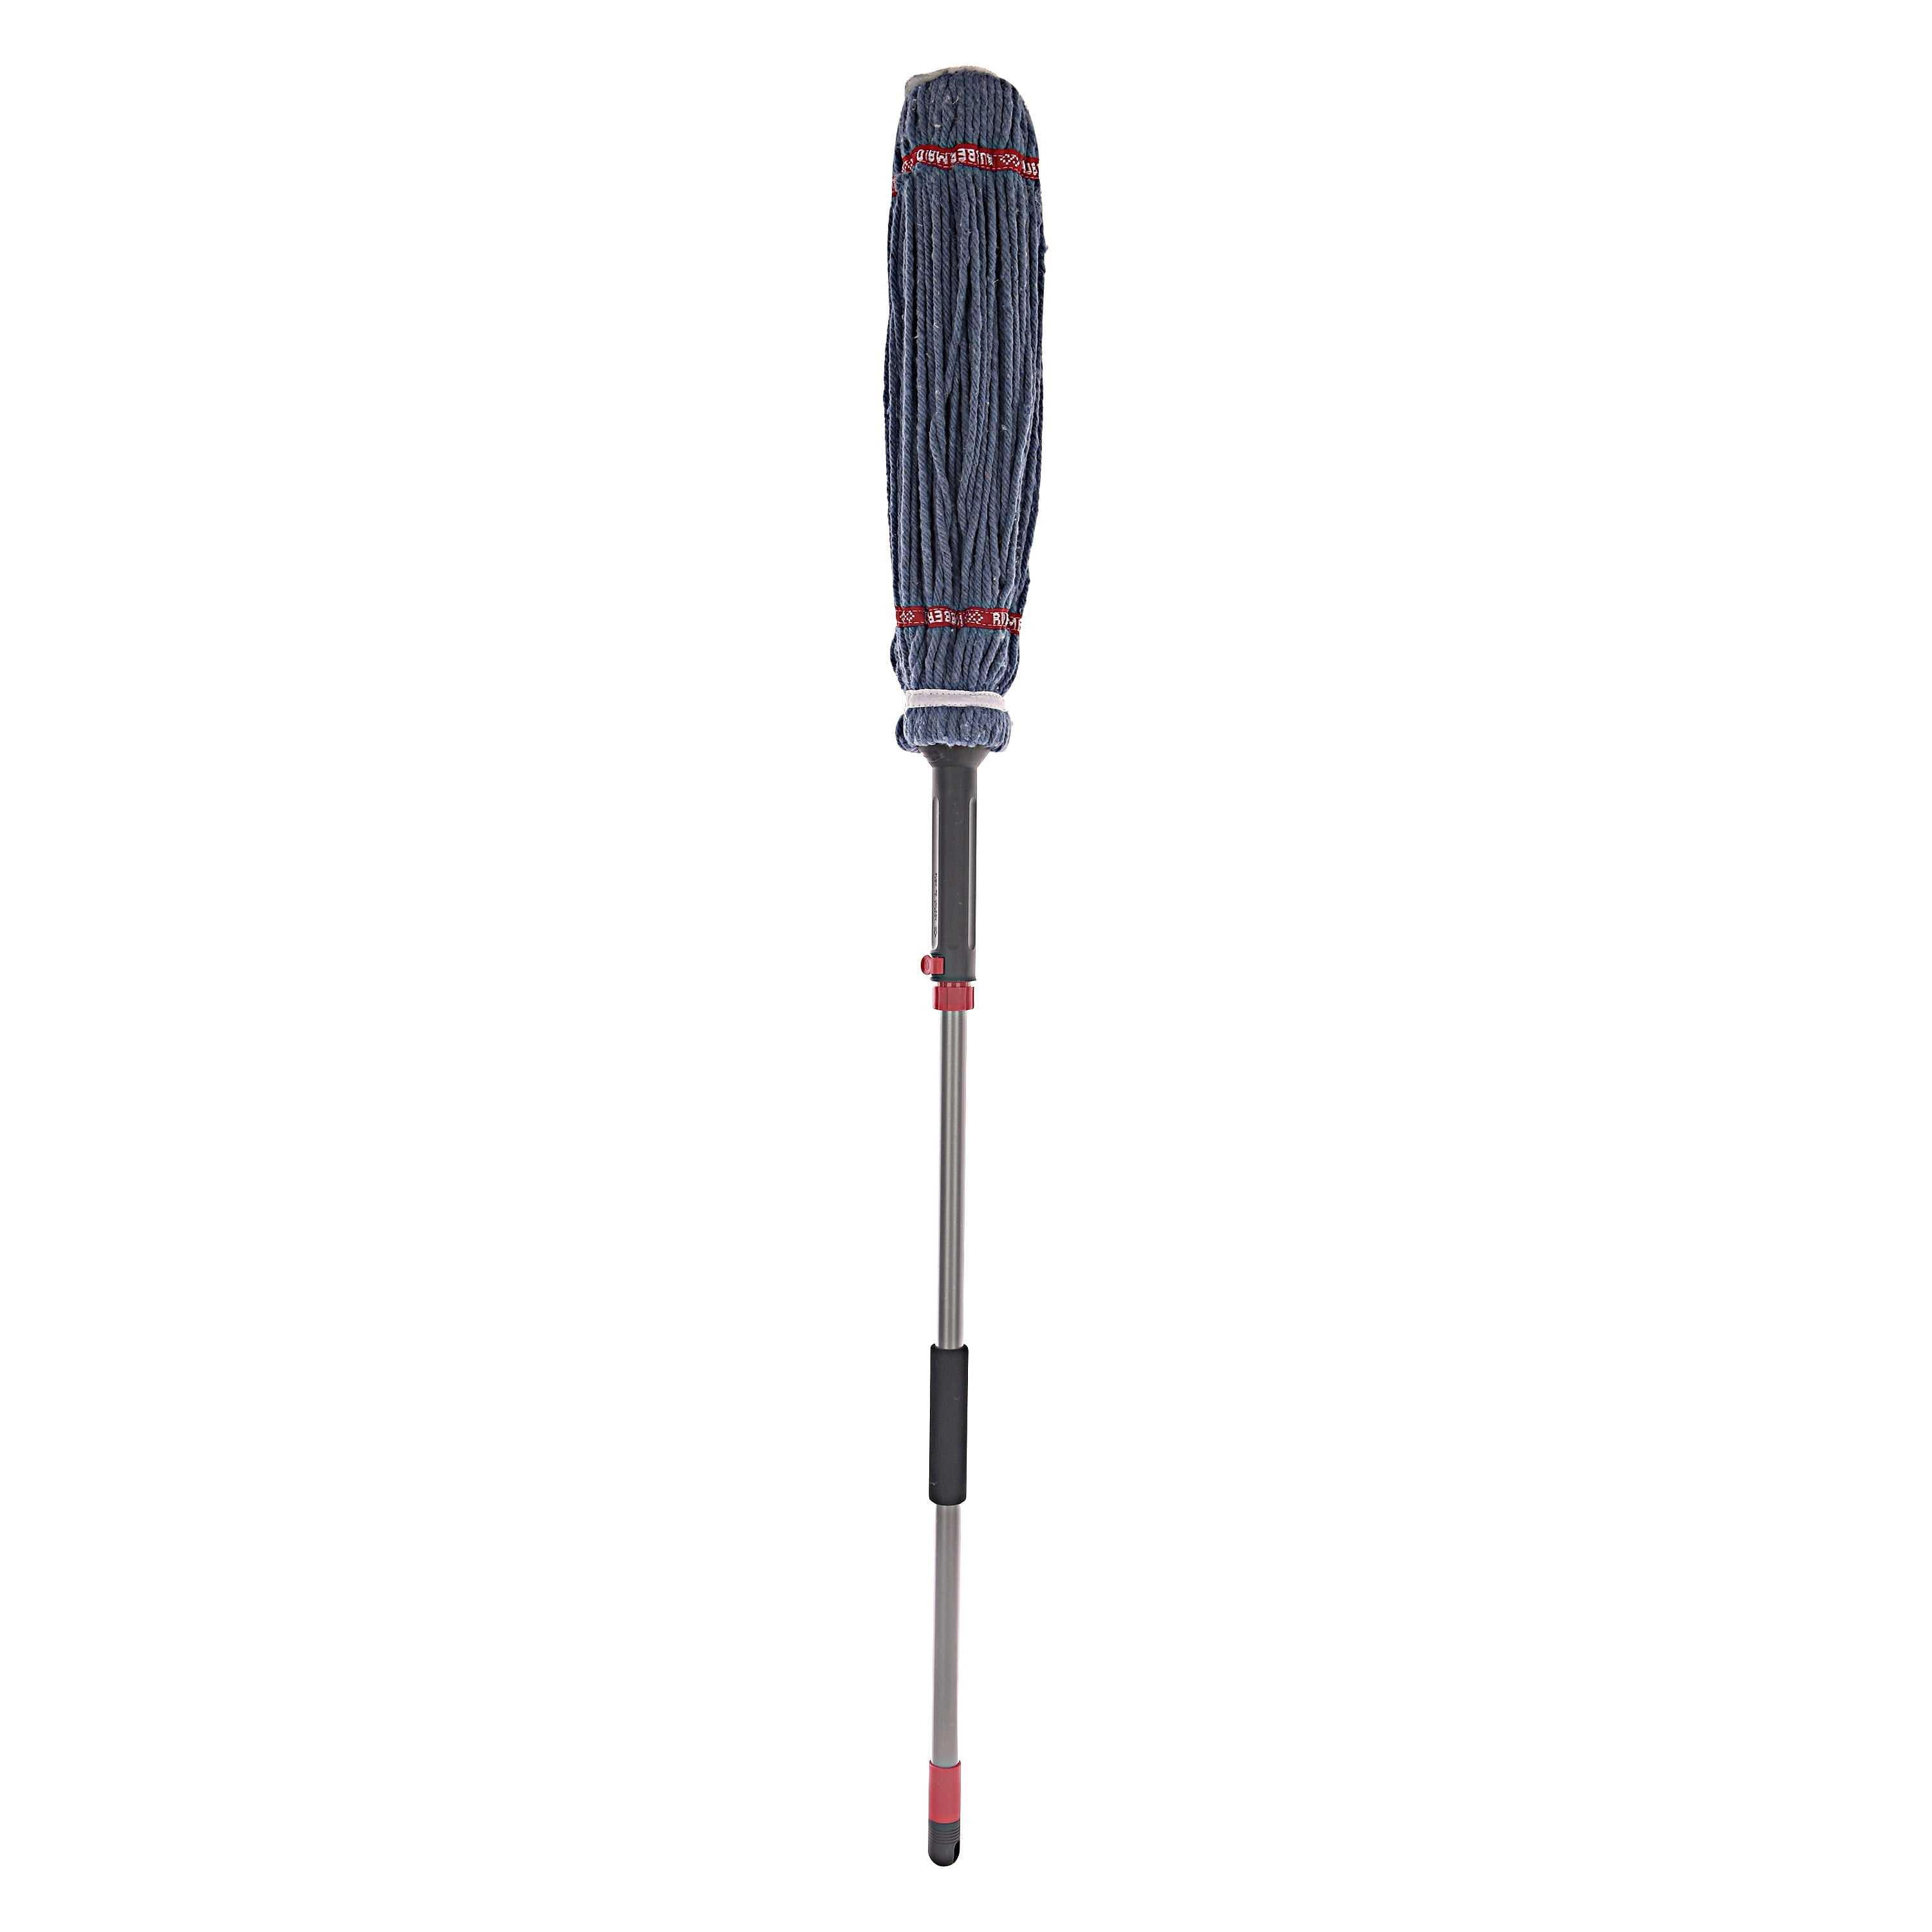 Rubbermaid MICROFIBER TWIST MOP in the Wet Mops department at